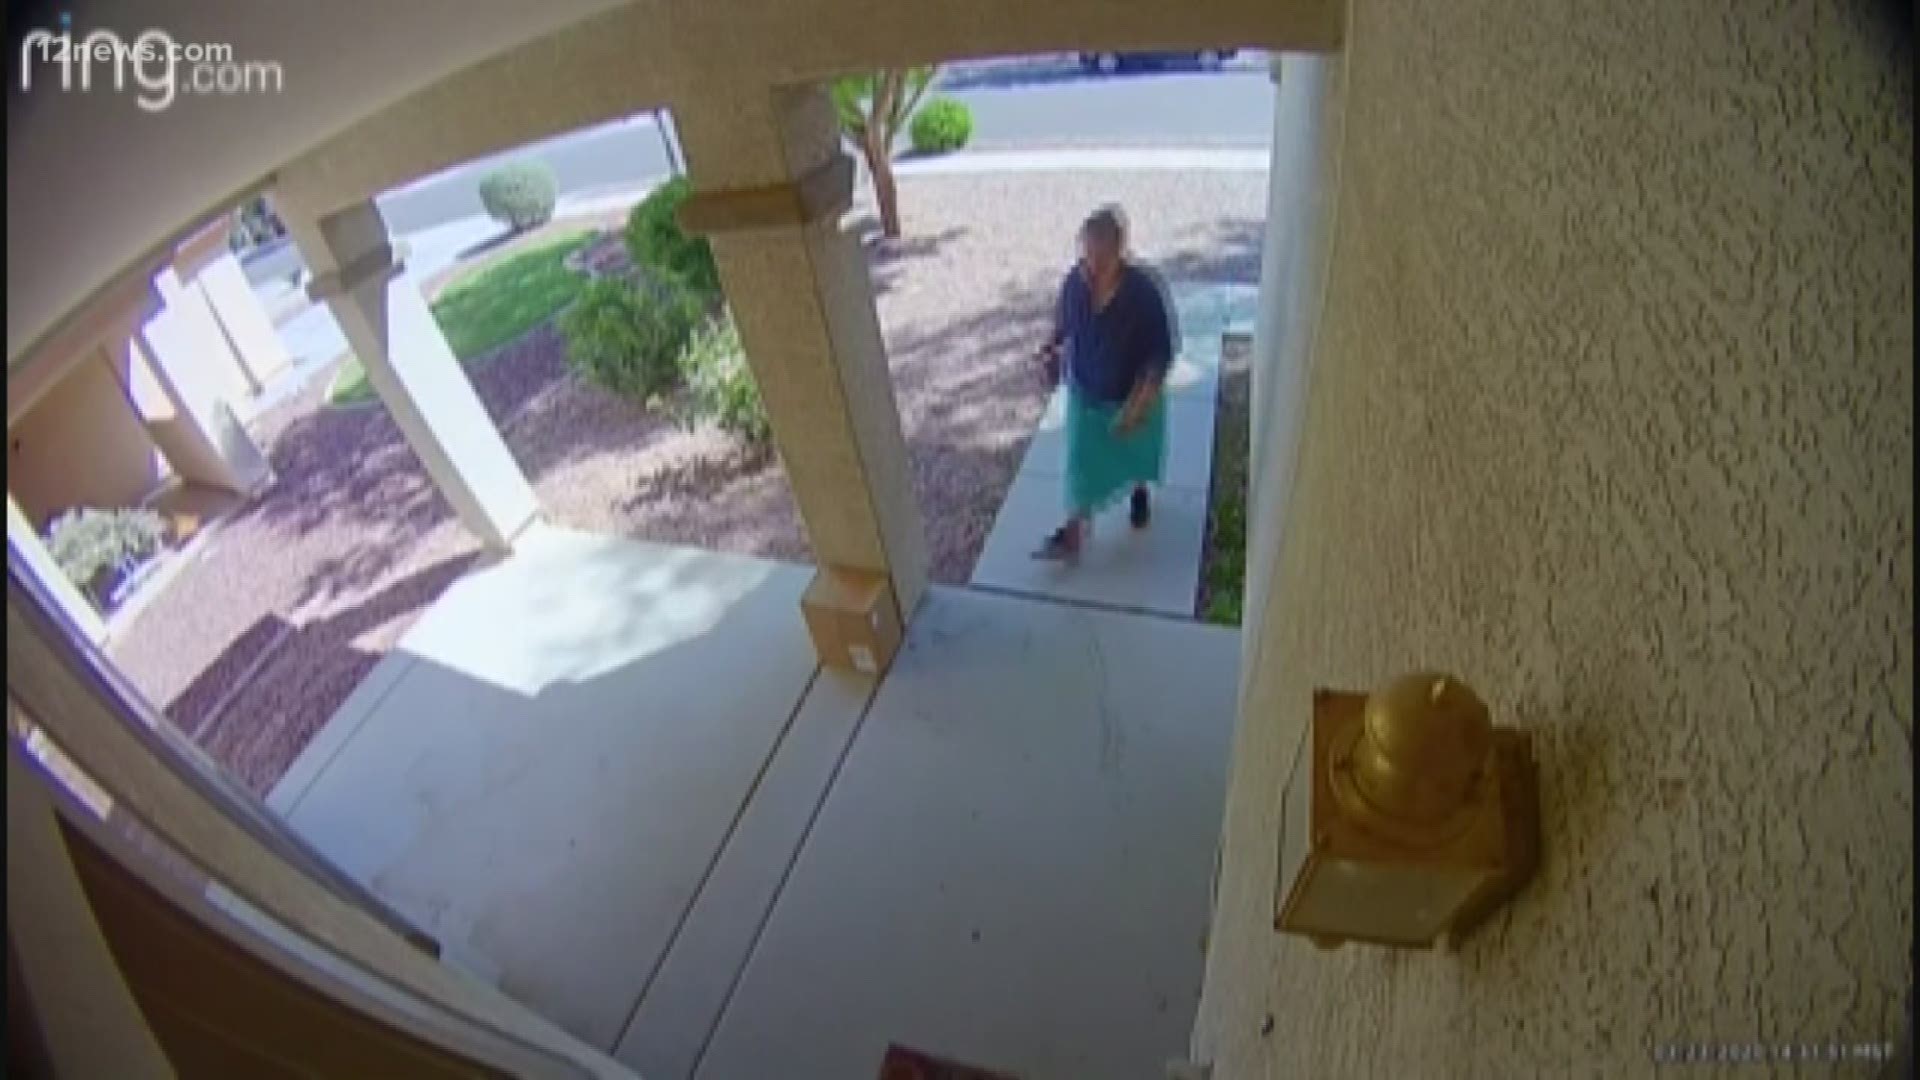 An Avondale business owner financially impacted by the coronavirus outbreak took another hit after an important delivery was stolen by a porch pirate.